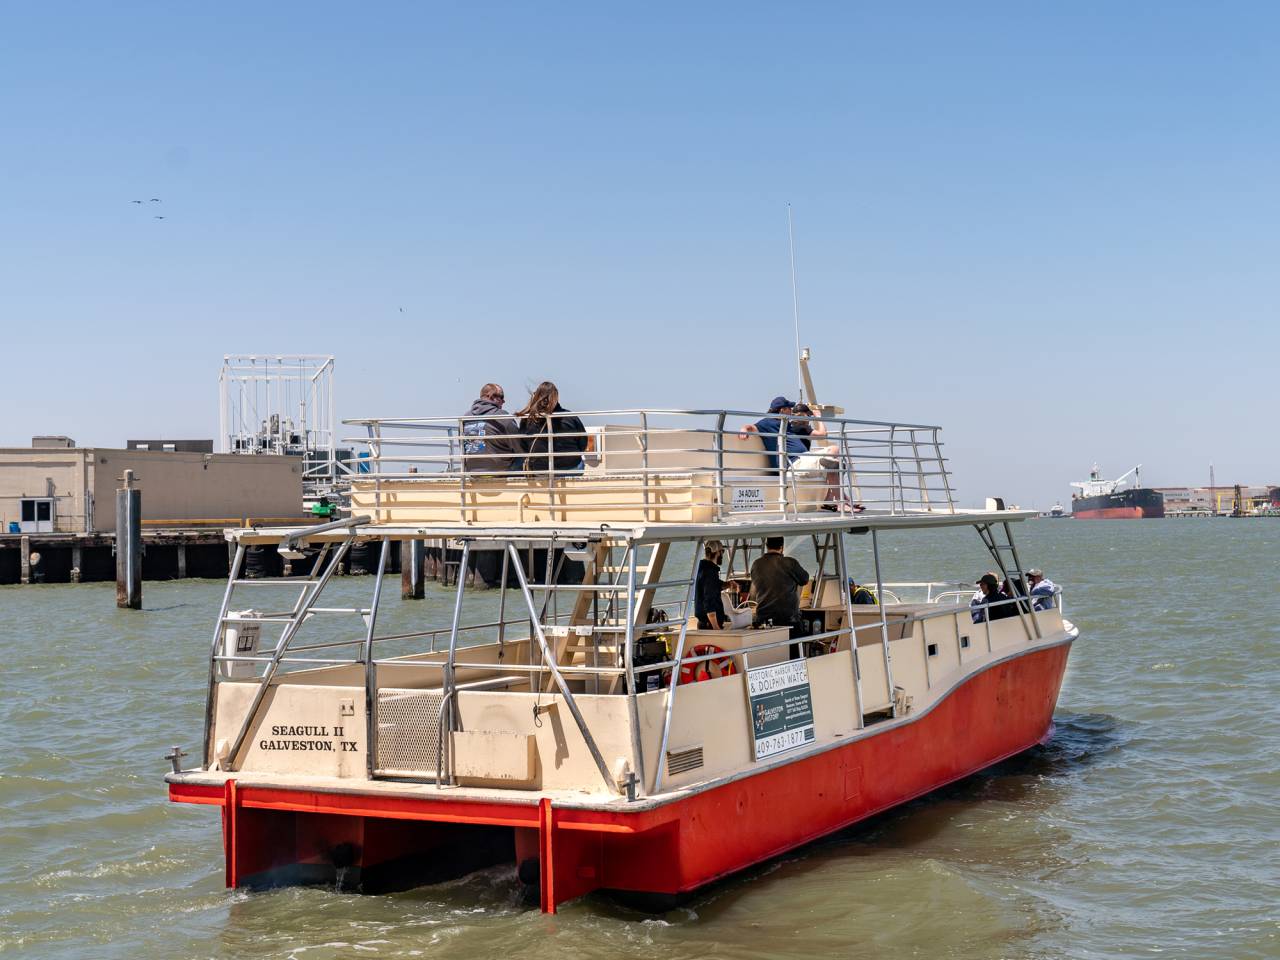 Galveston Harbor Tour and Dolphin Watch